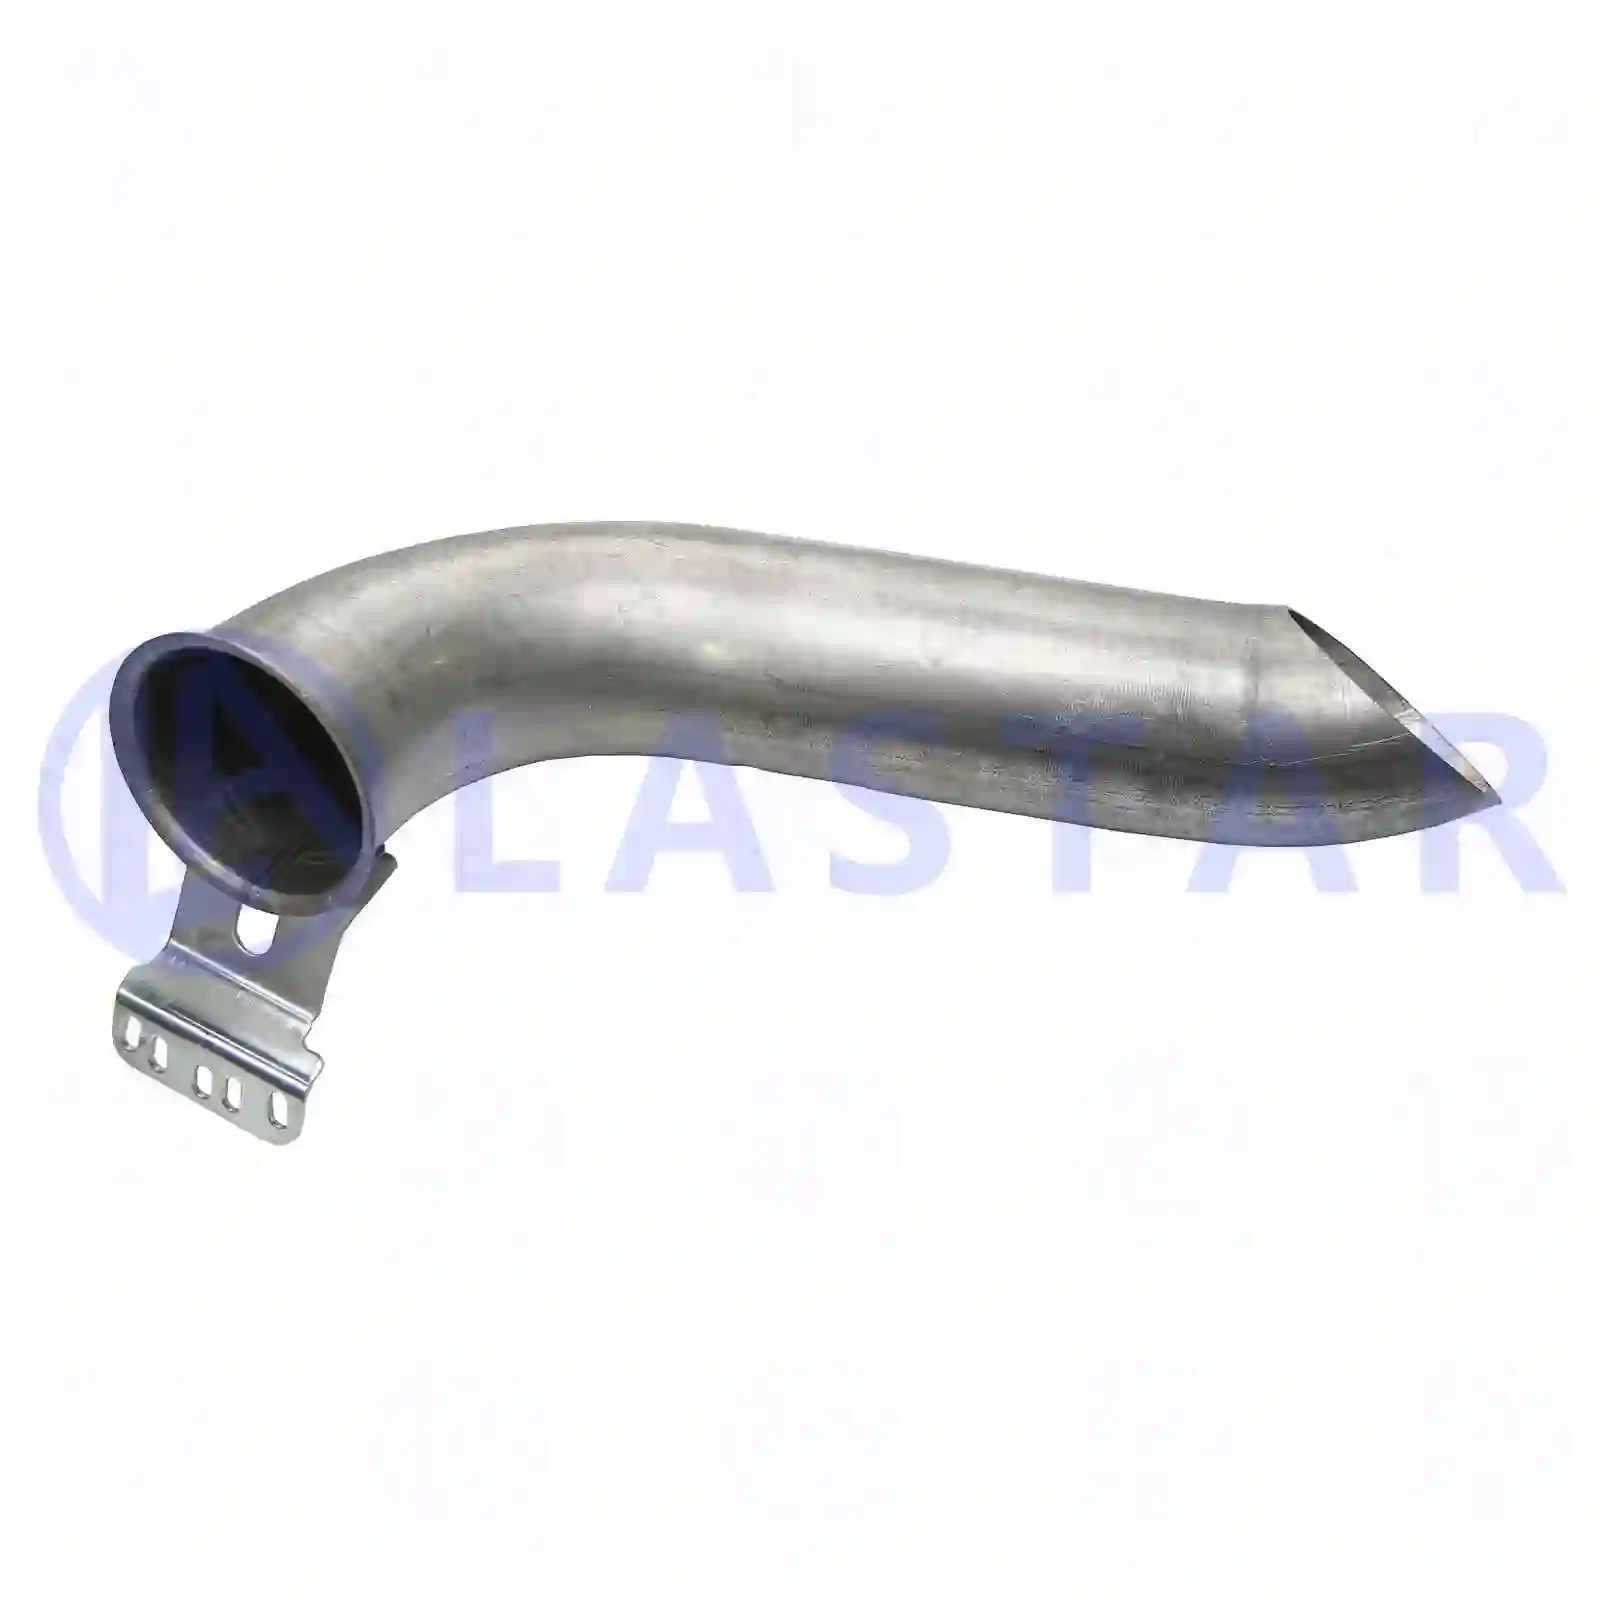 End pipe, 77707001, 1435720, 1483286, 2009274 ||  77707001 Lastar Spare Part | Truck Spare Parts, Auotomotive Spare Parts End pipe, 77707001, 1435720, 1483286, 2009274 ||  77707001 Lastar Spare Part | Truck Spare Parts, Auotomotive Spare Parts